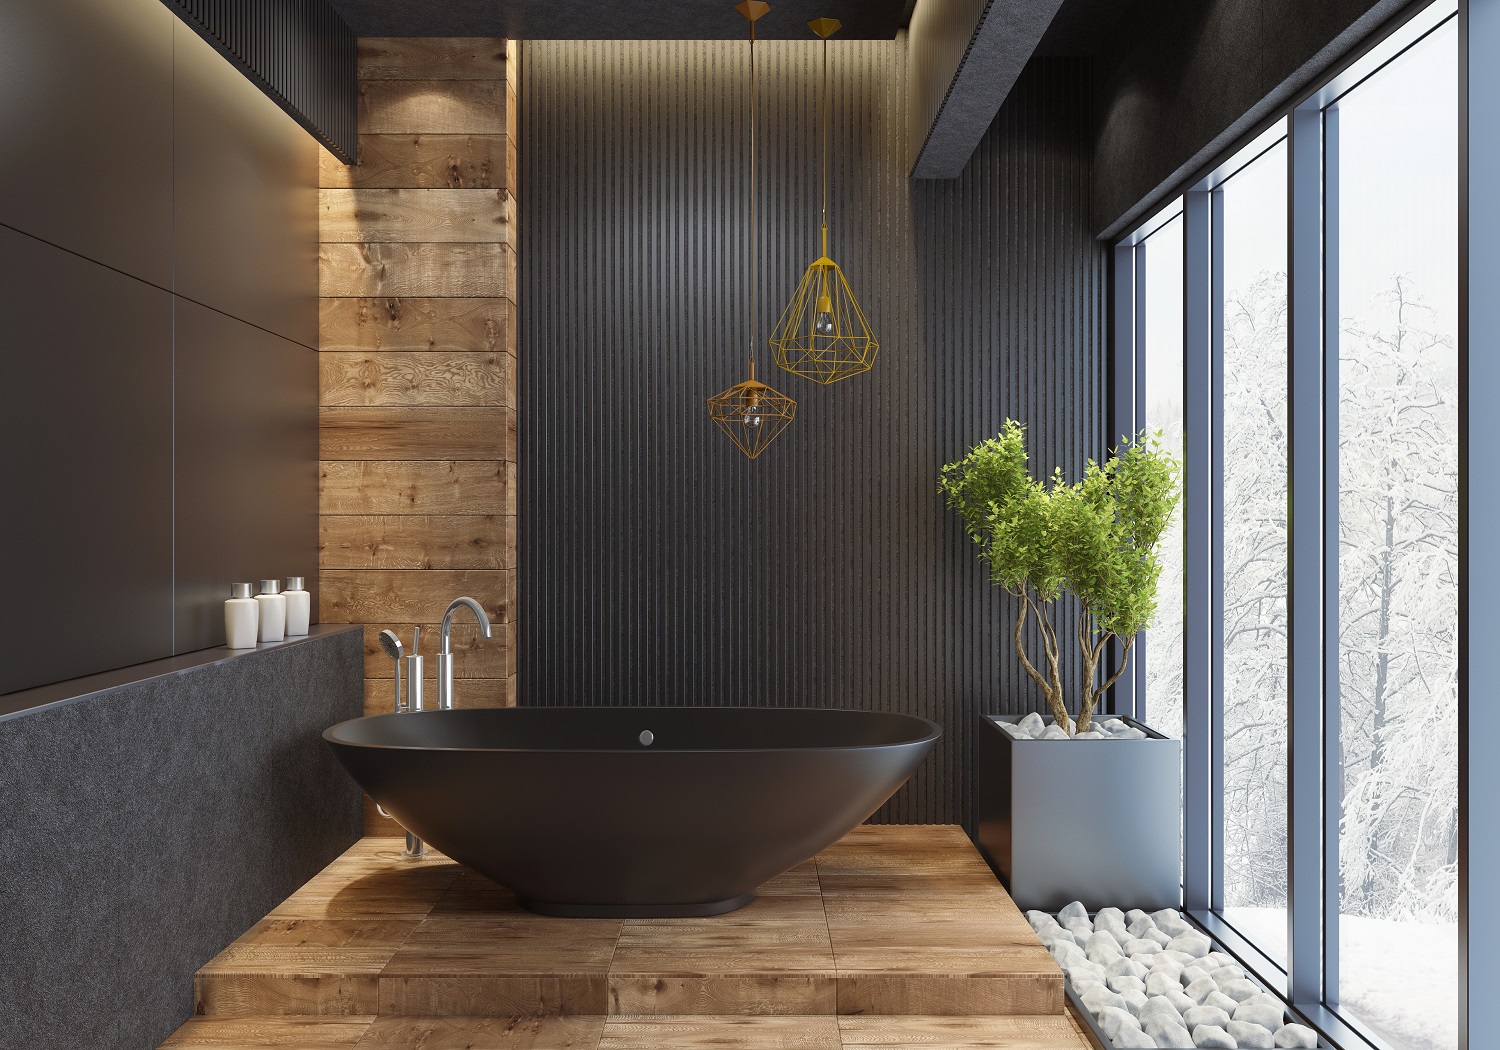 Lifestyle image of a contemporary bathroom, with wooden floors, black slotted walls and a painted black boat bath